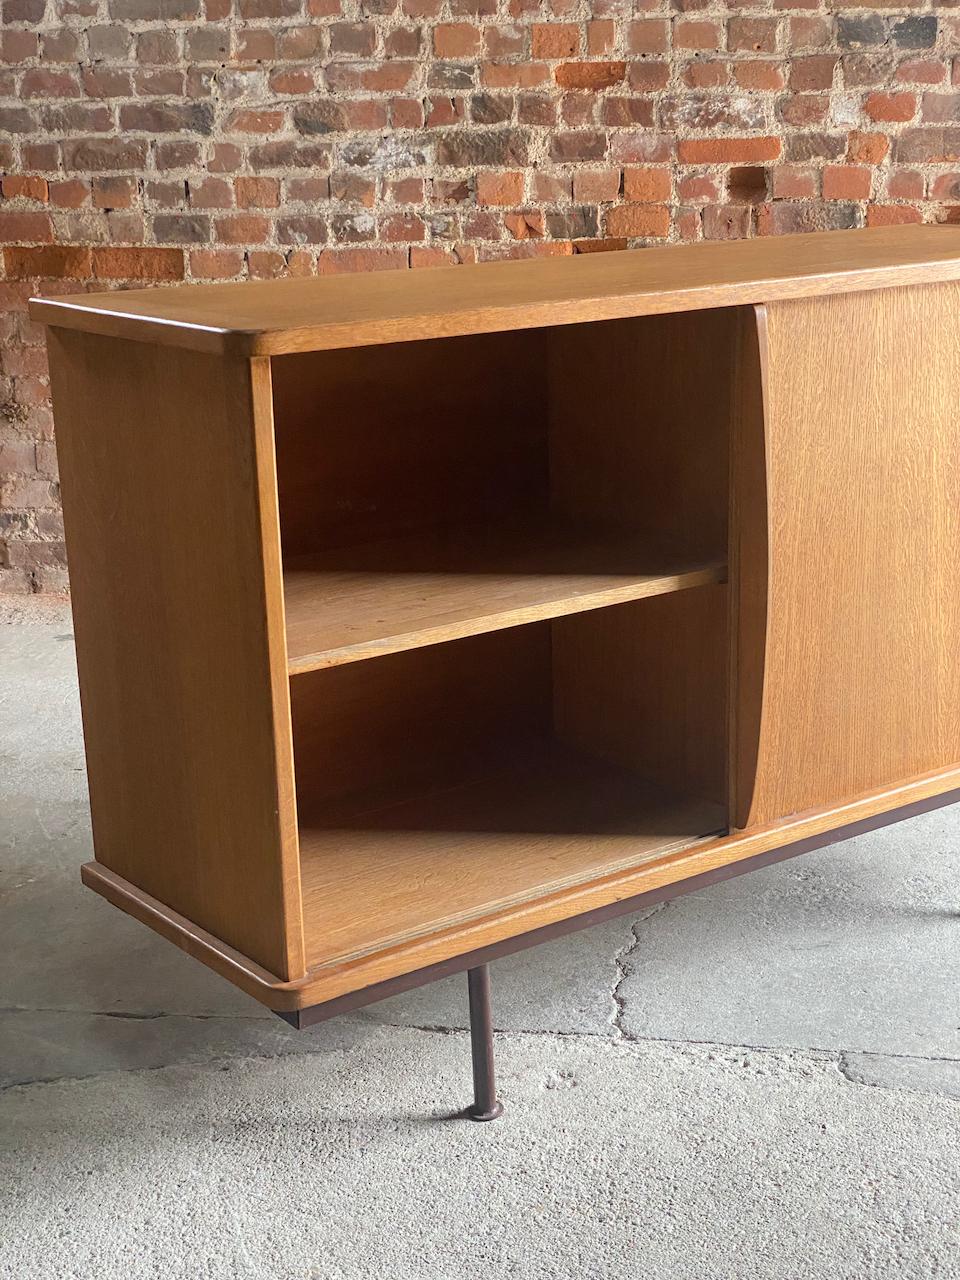 Jean Prouve Oak Sideboard Cabinet by Ateliers France circa 1940 4